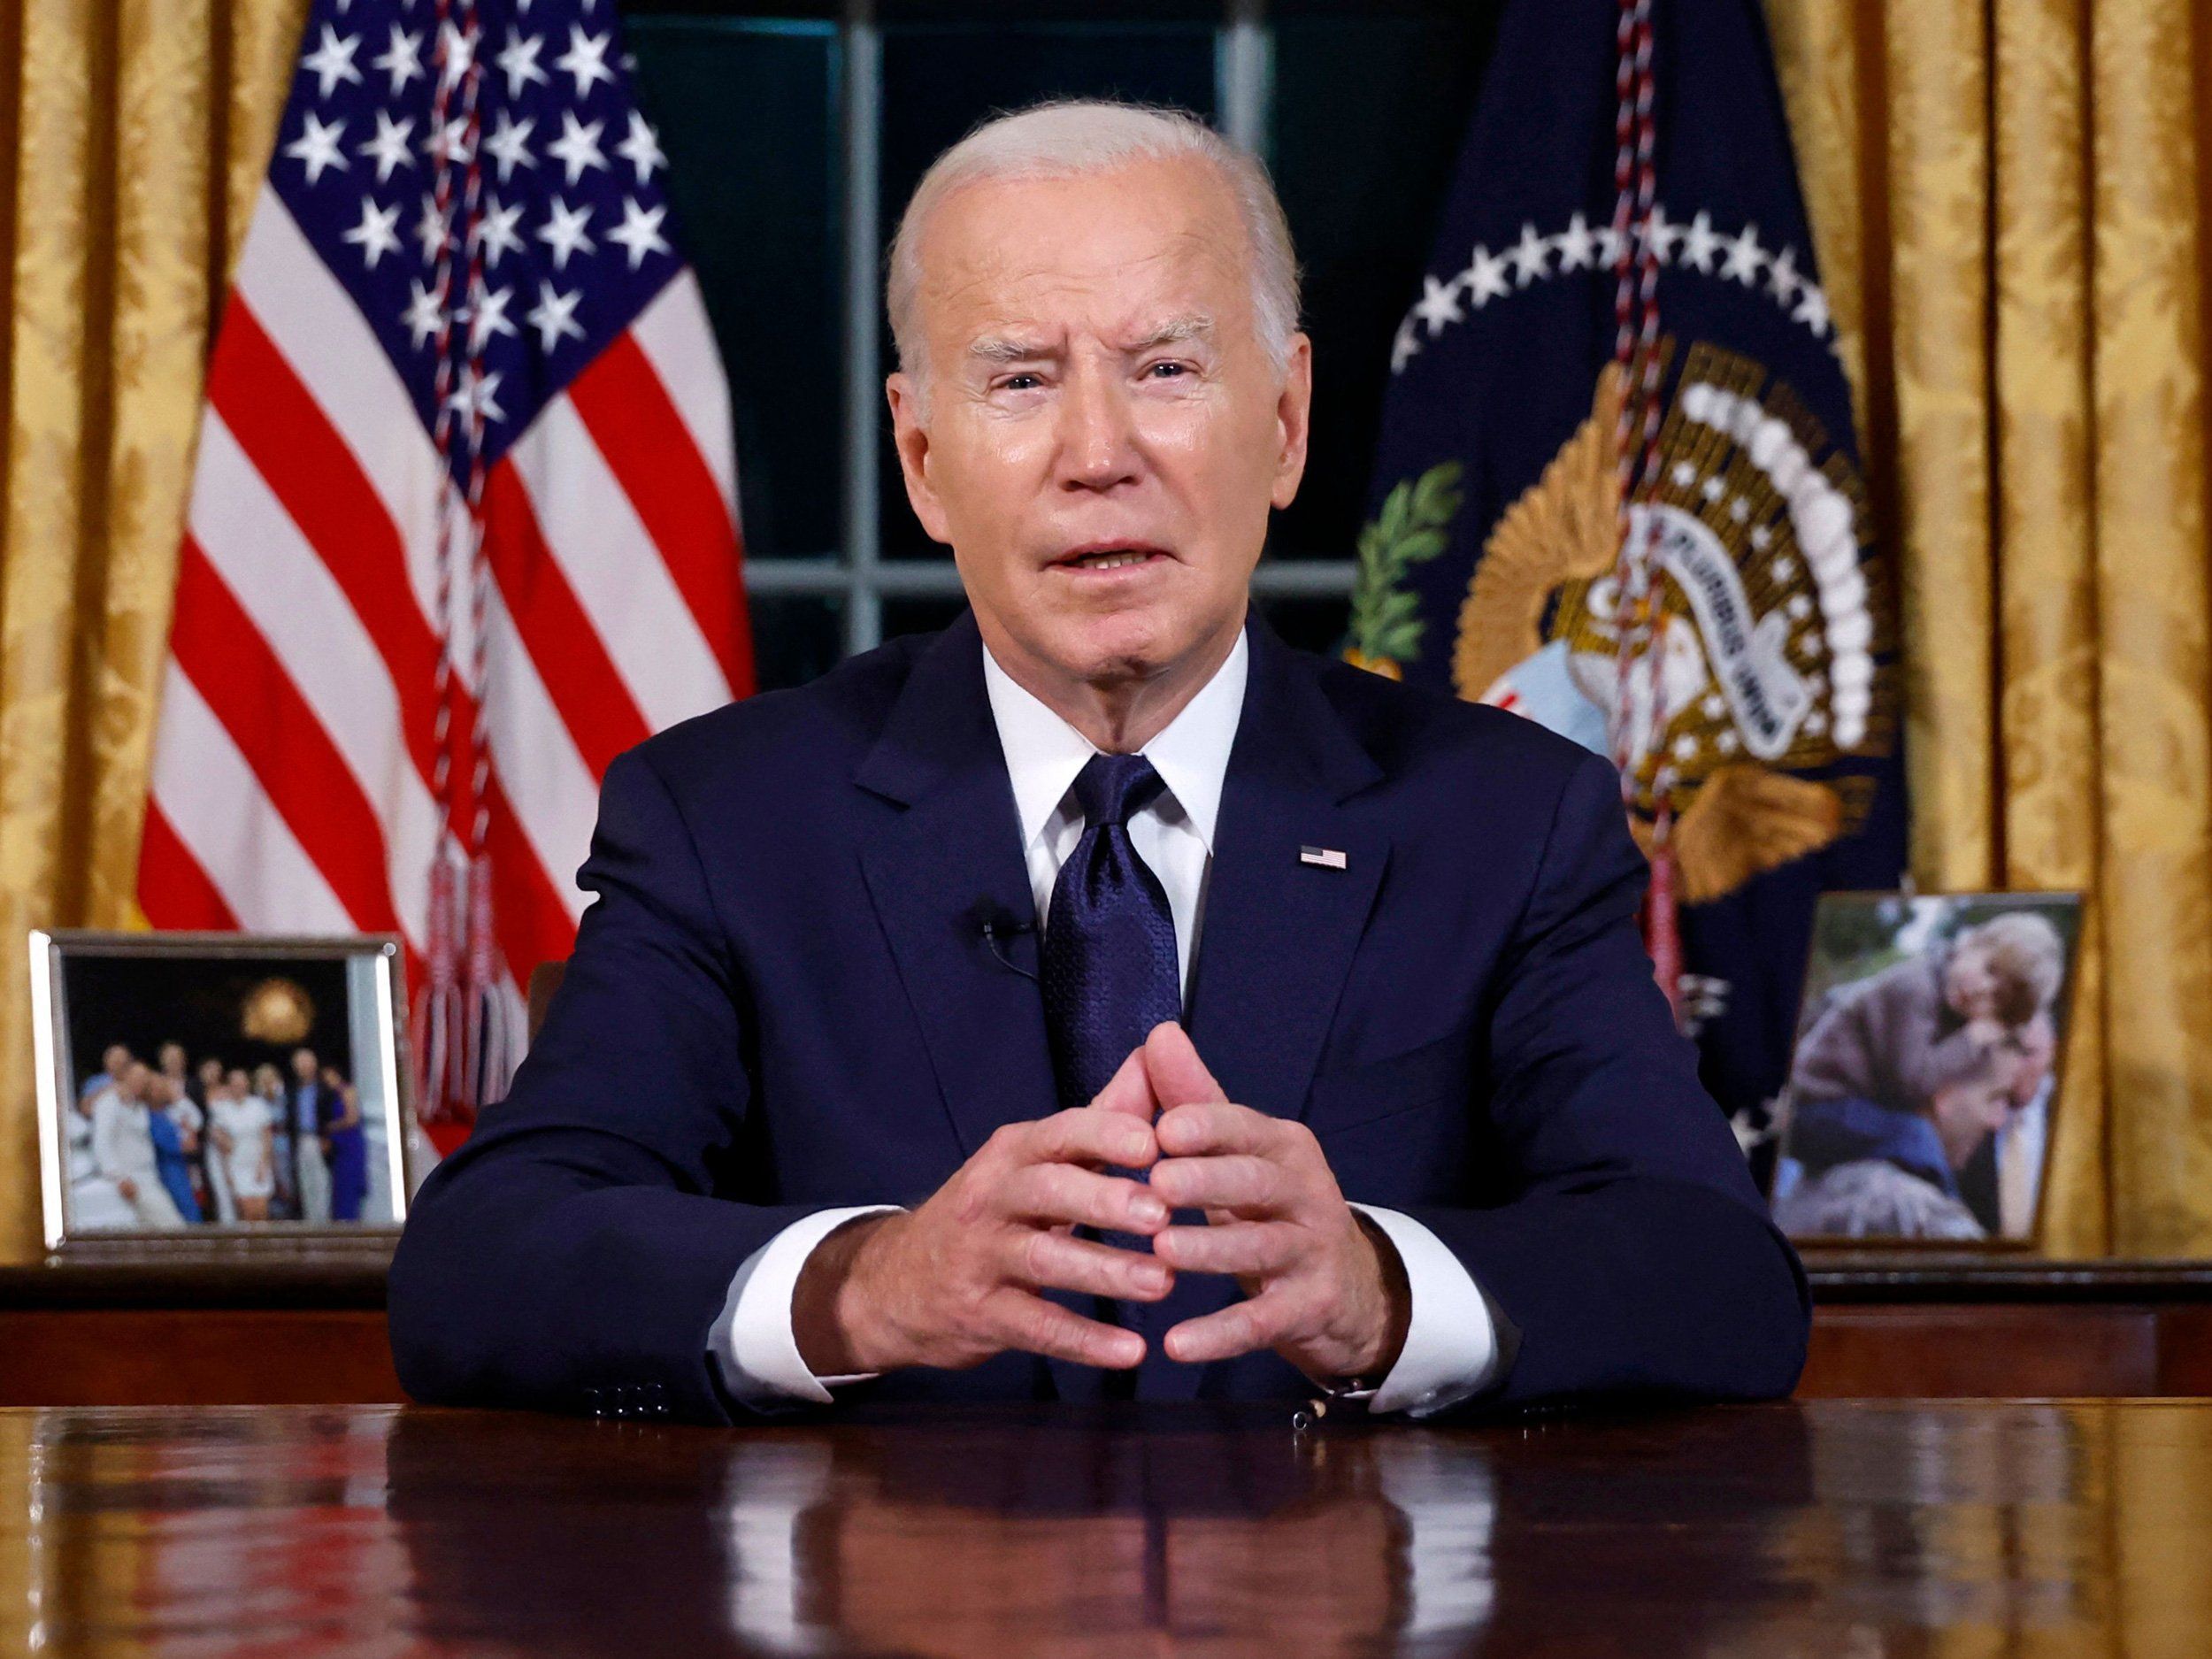 President Joe Biden sitting at a desk with hands together talking to the camera